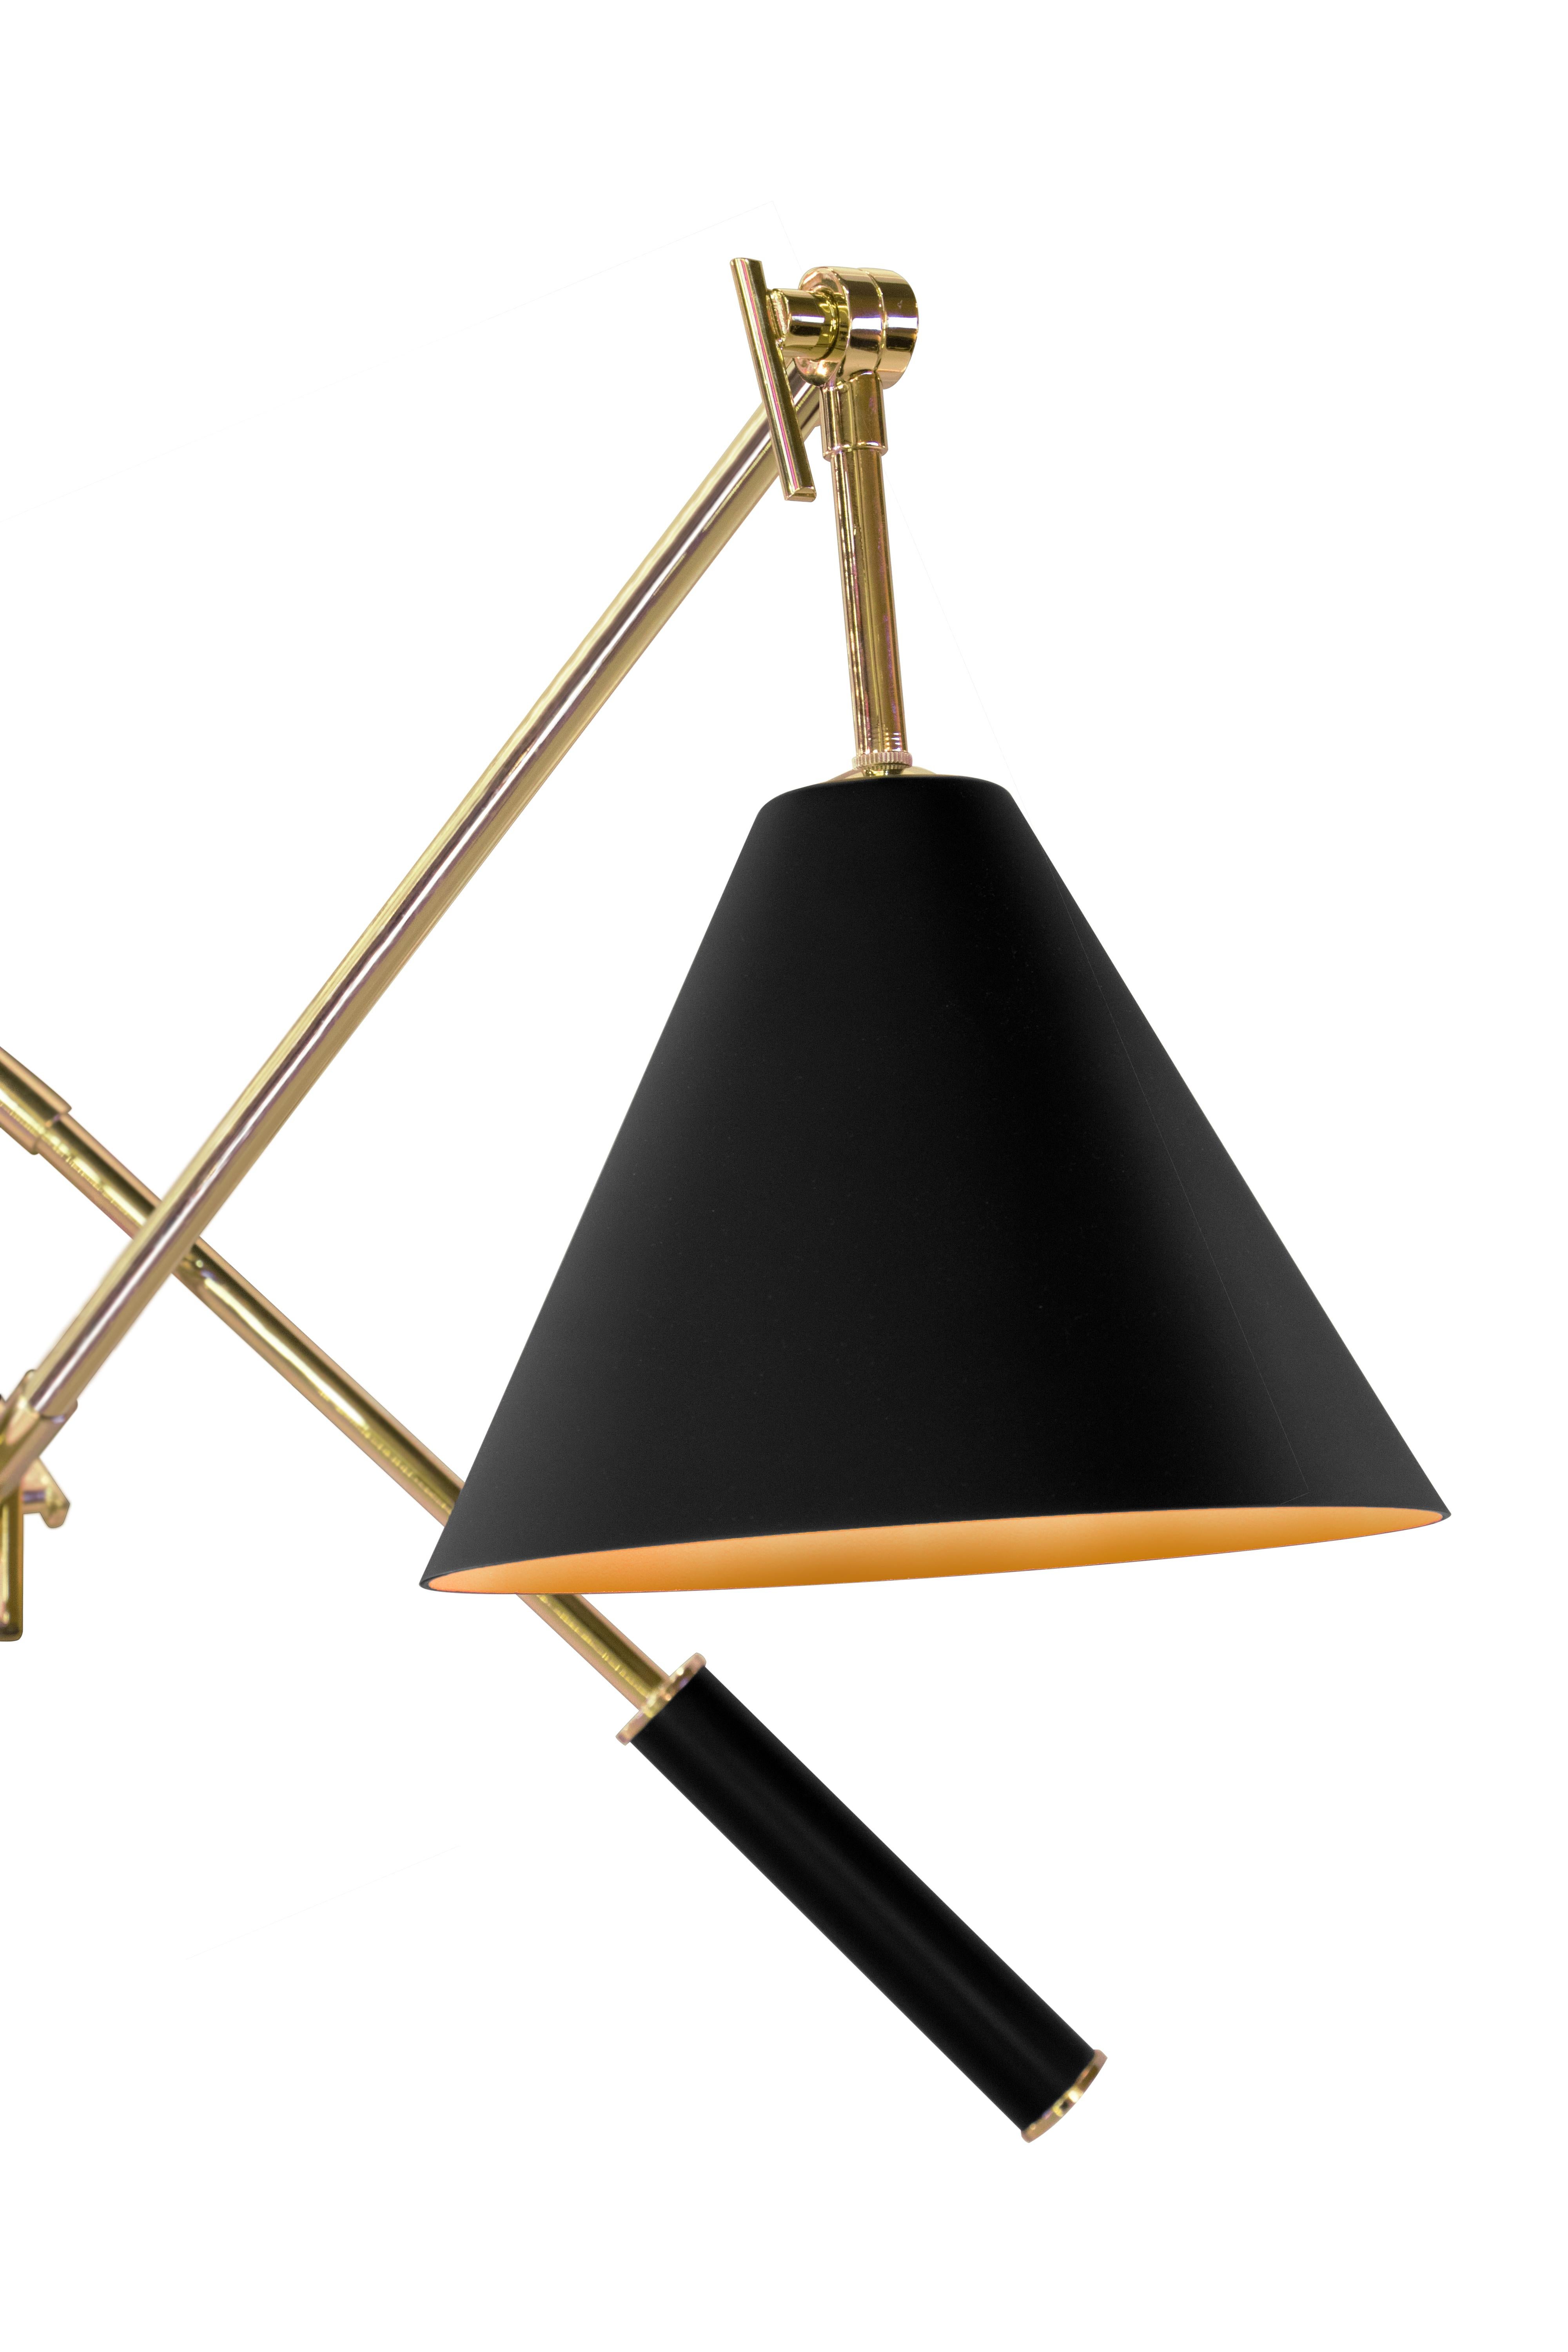 Torchiere is probably one of the most functional lamps of DelightFULL. Ideal for your Mid-Century Modern office and reading corner, this floor light will add elegance to every single space. With Torchiere, your lighting options are truly limitless.